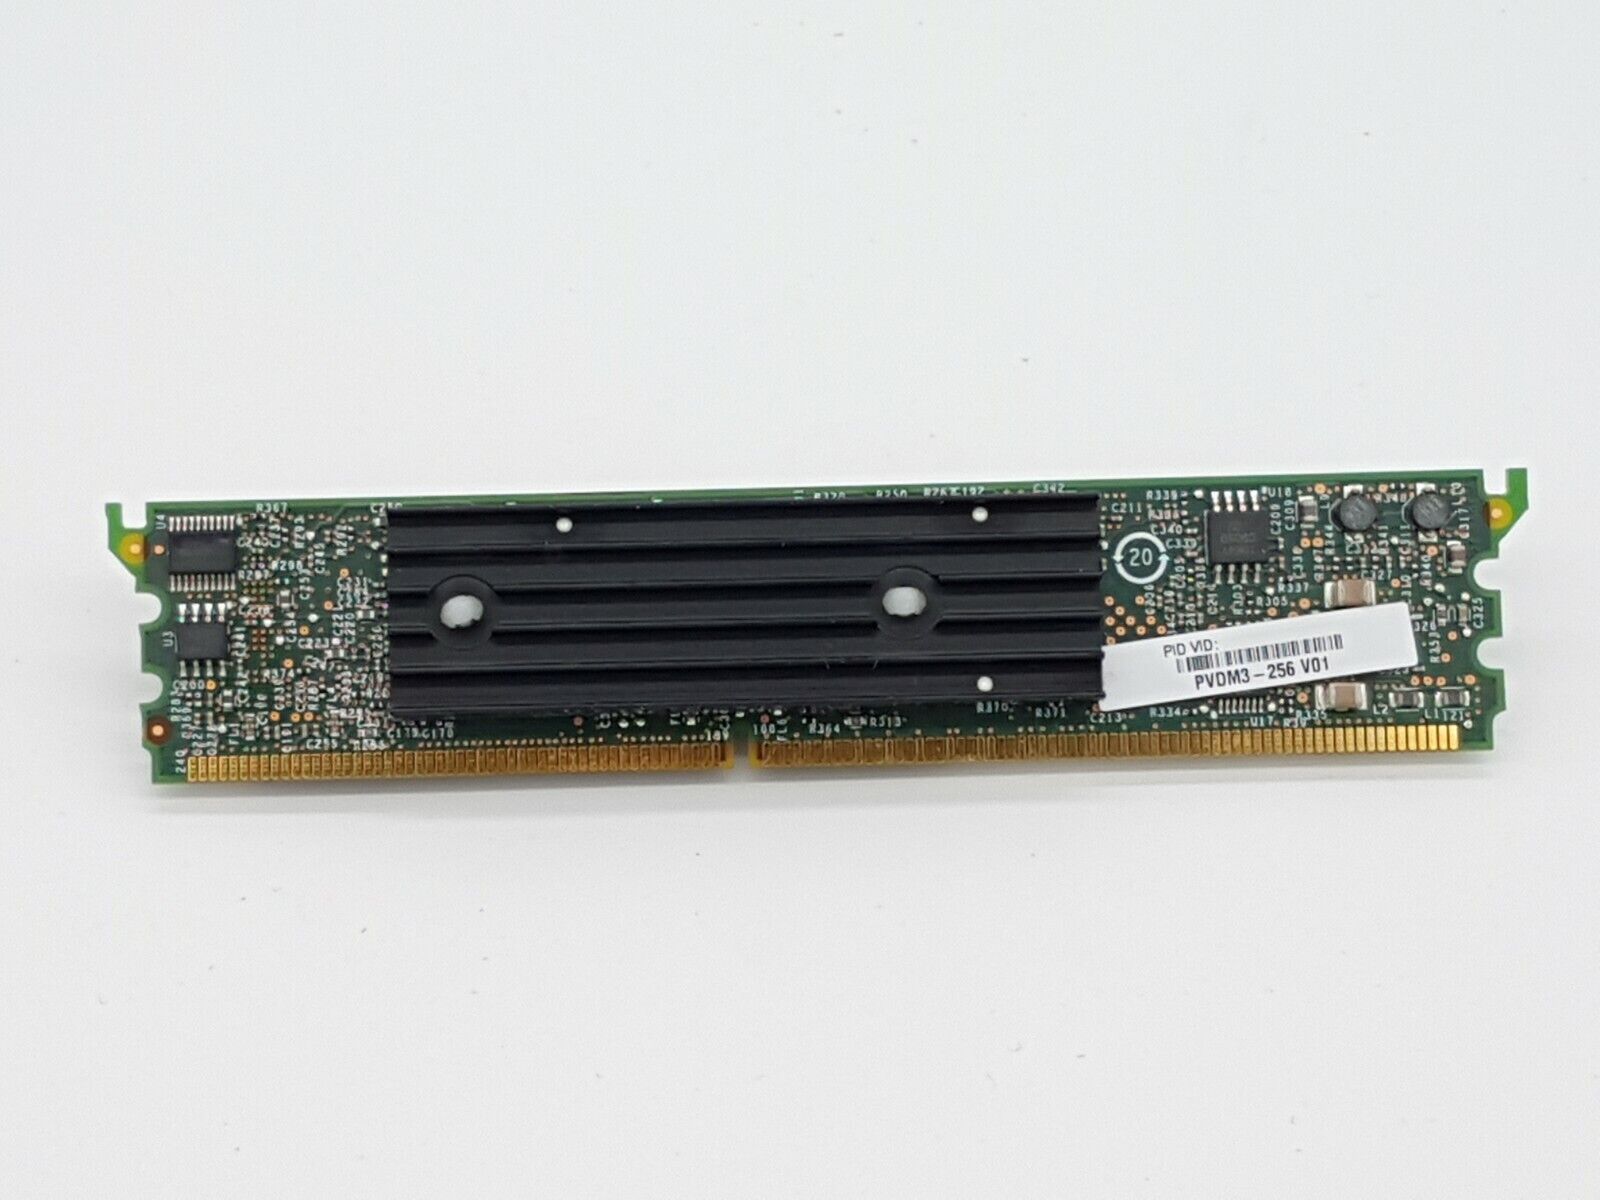 Cisco PVDM3-256 High Density 256 Channel Voice And Video DSP Module 73-11812-03